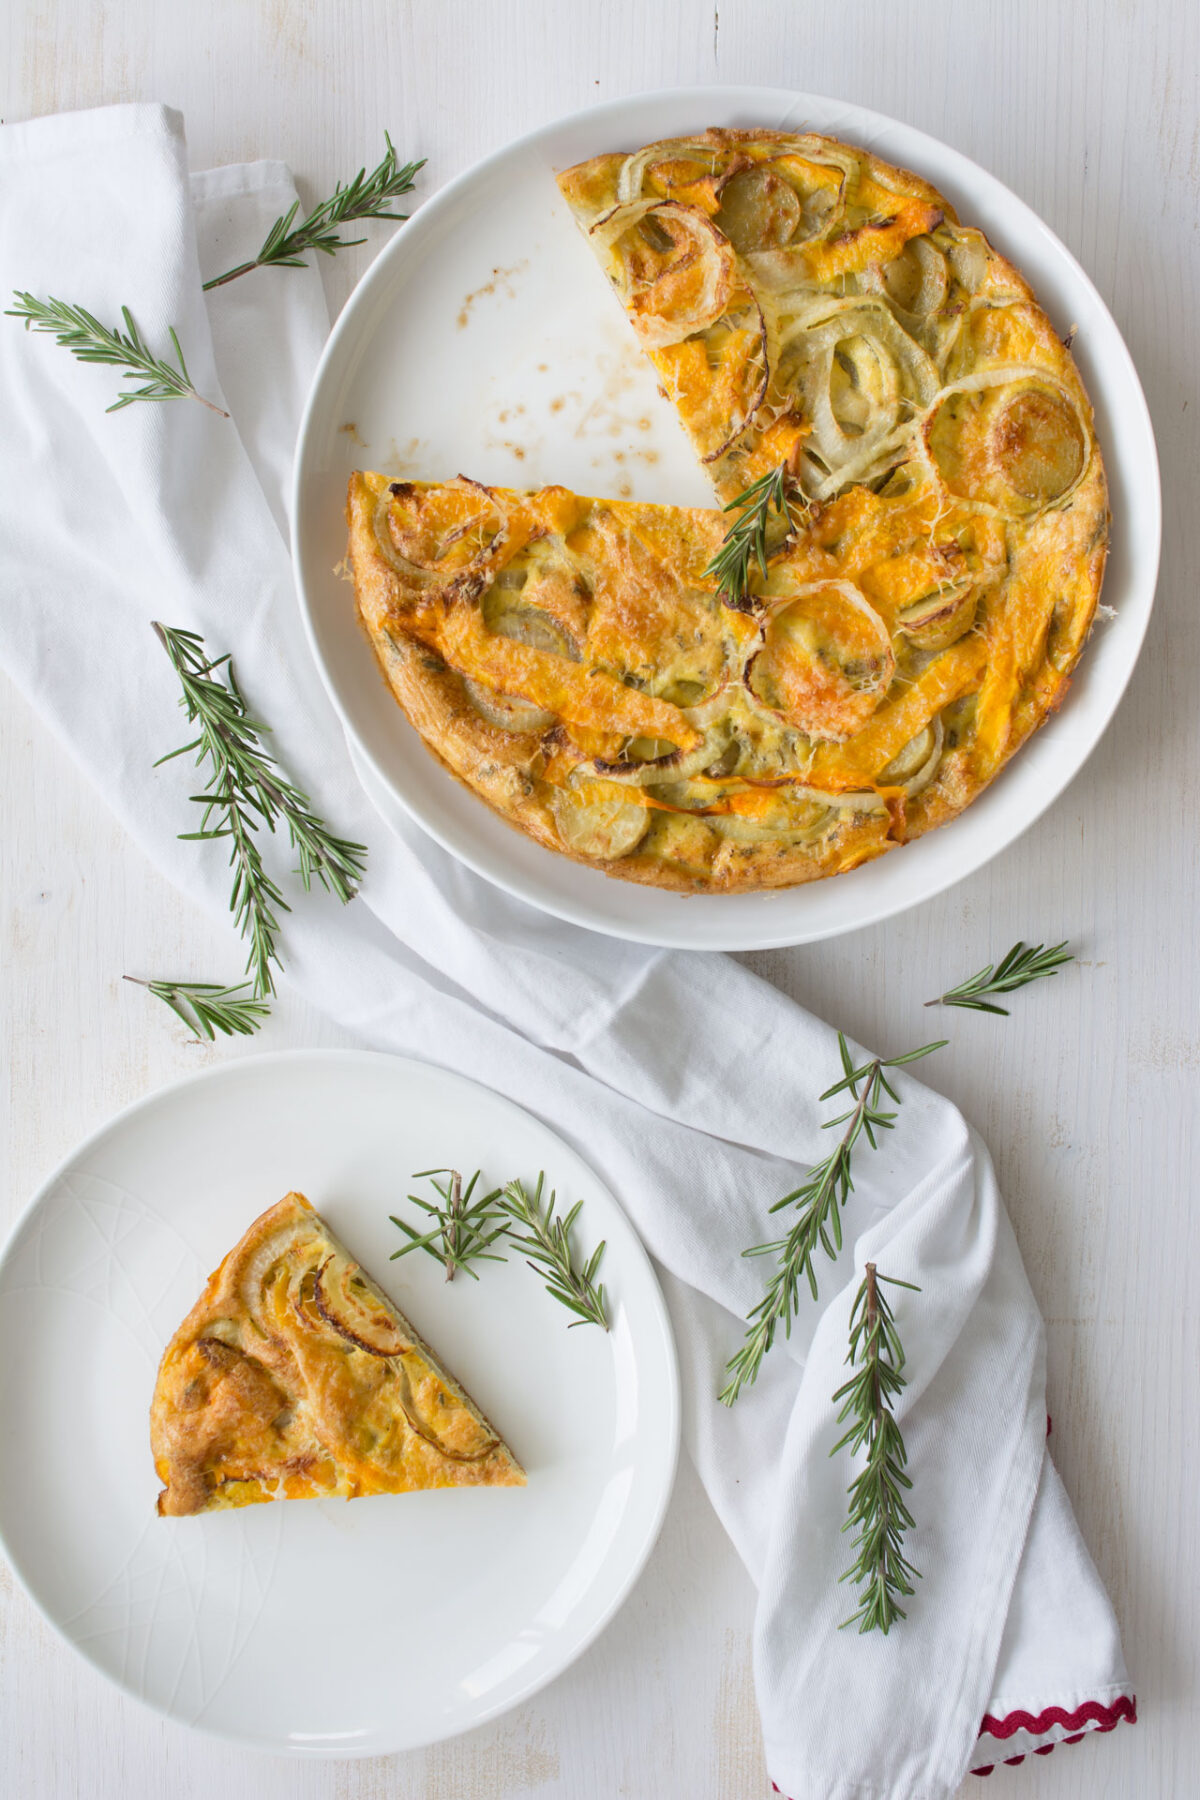 top-down view of a plated Butternut Squash and Rosemary Frittata, showcasing a cut portion on one plate and a sliced portion on another